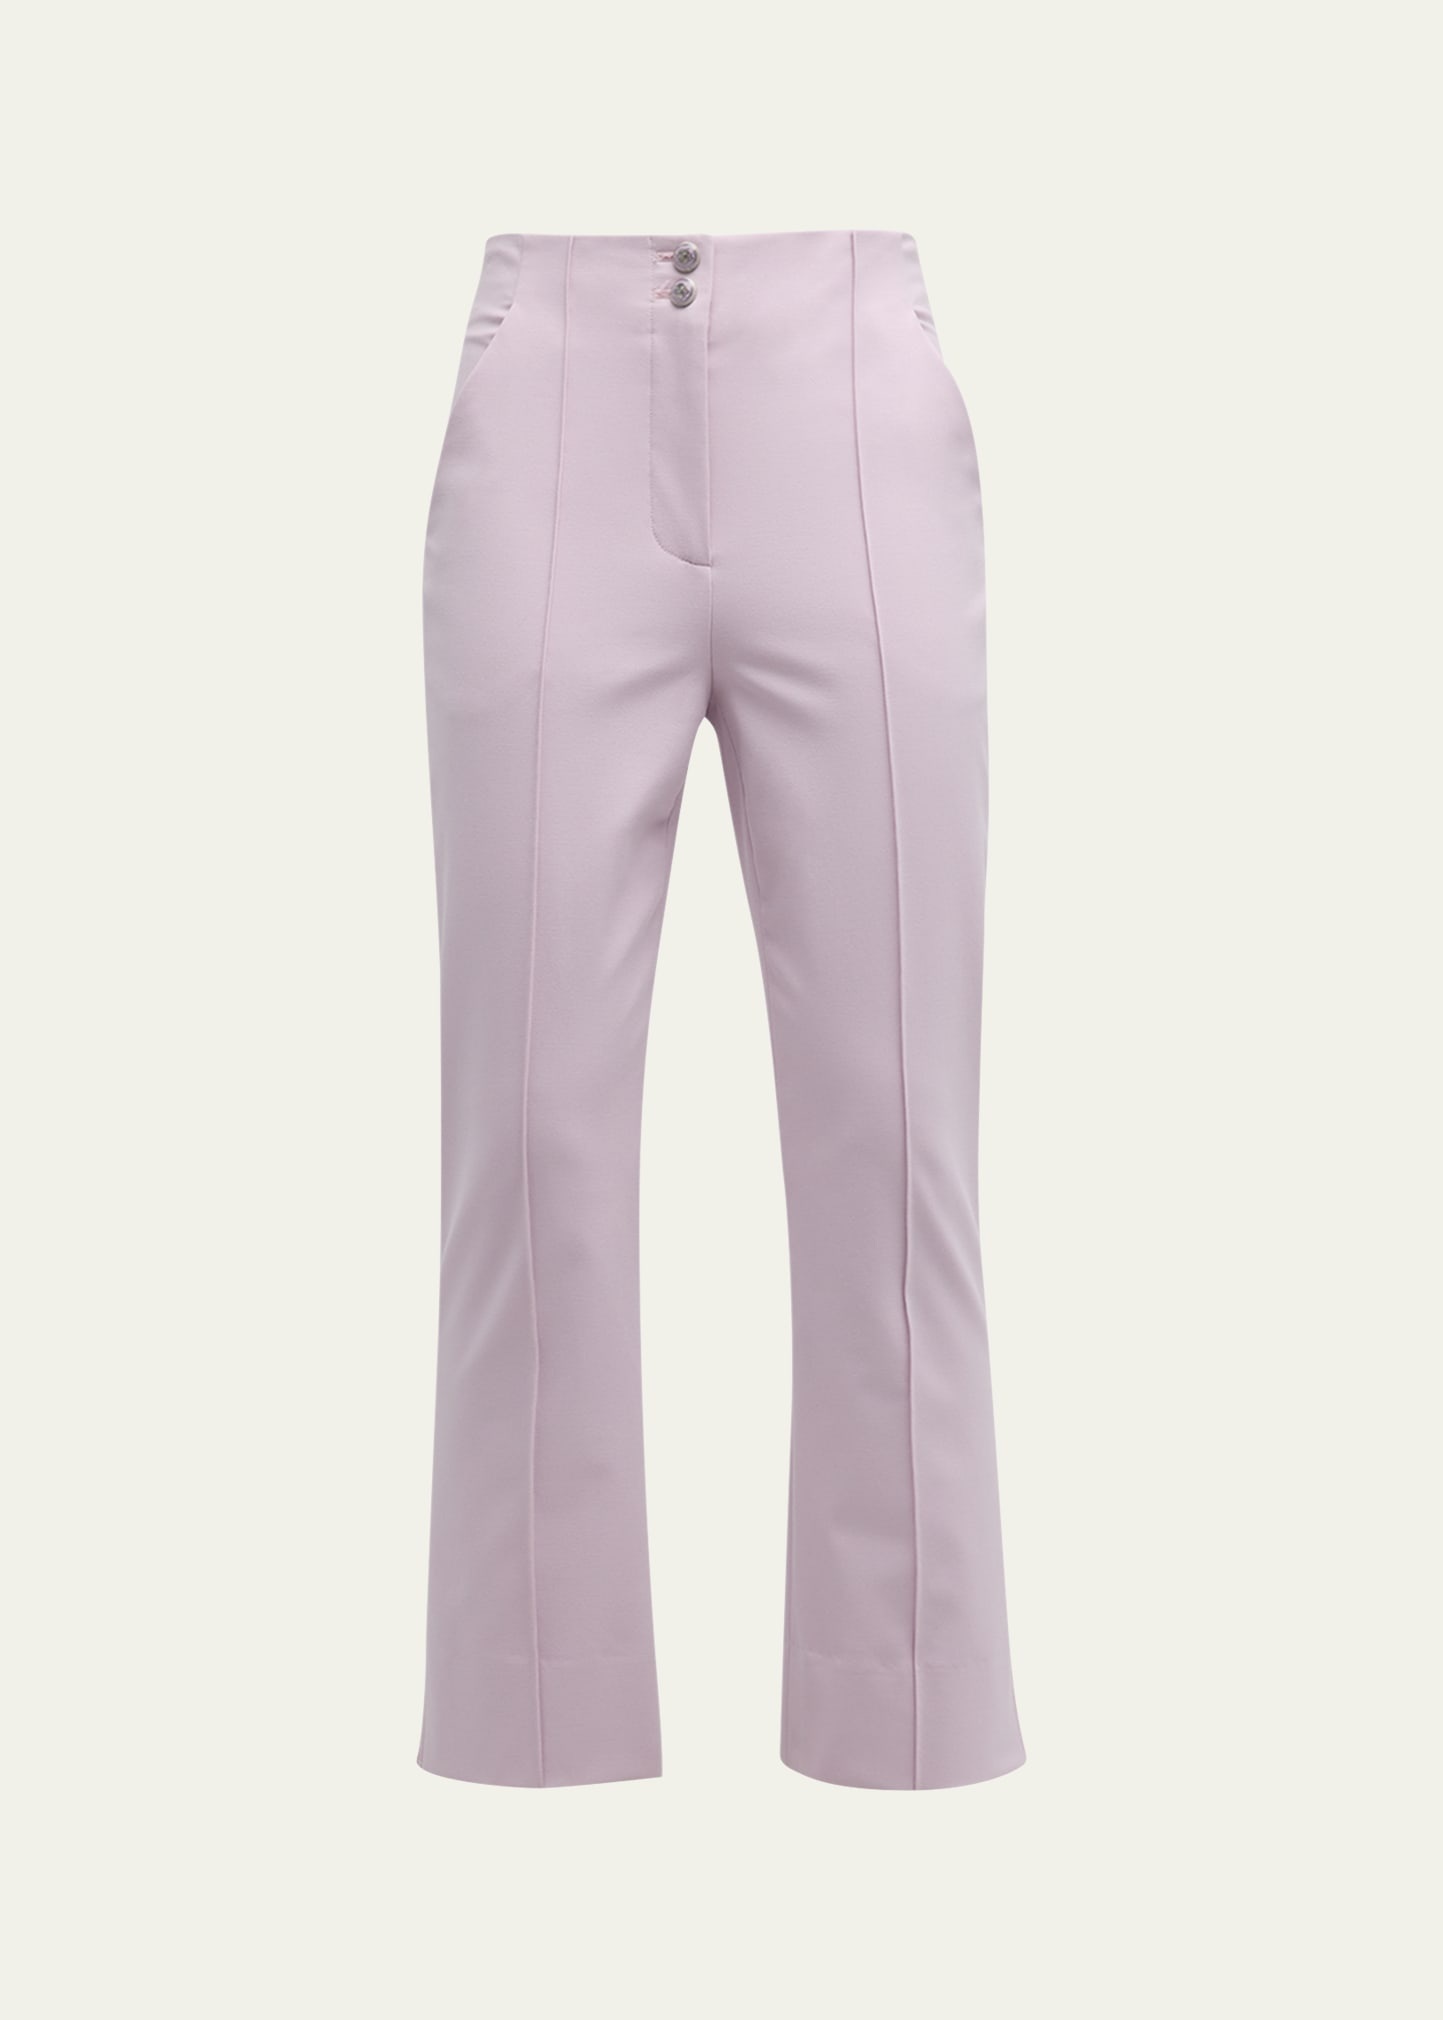 Kean Cropped Tailored Pants - 1